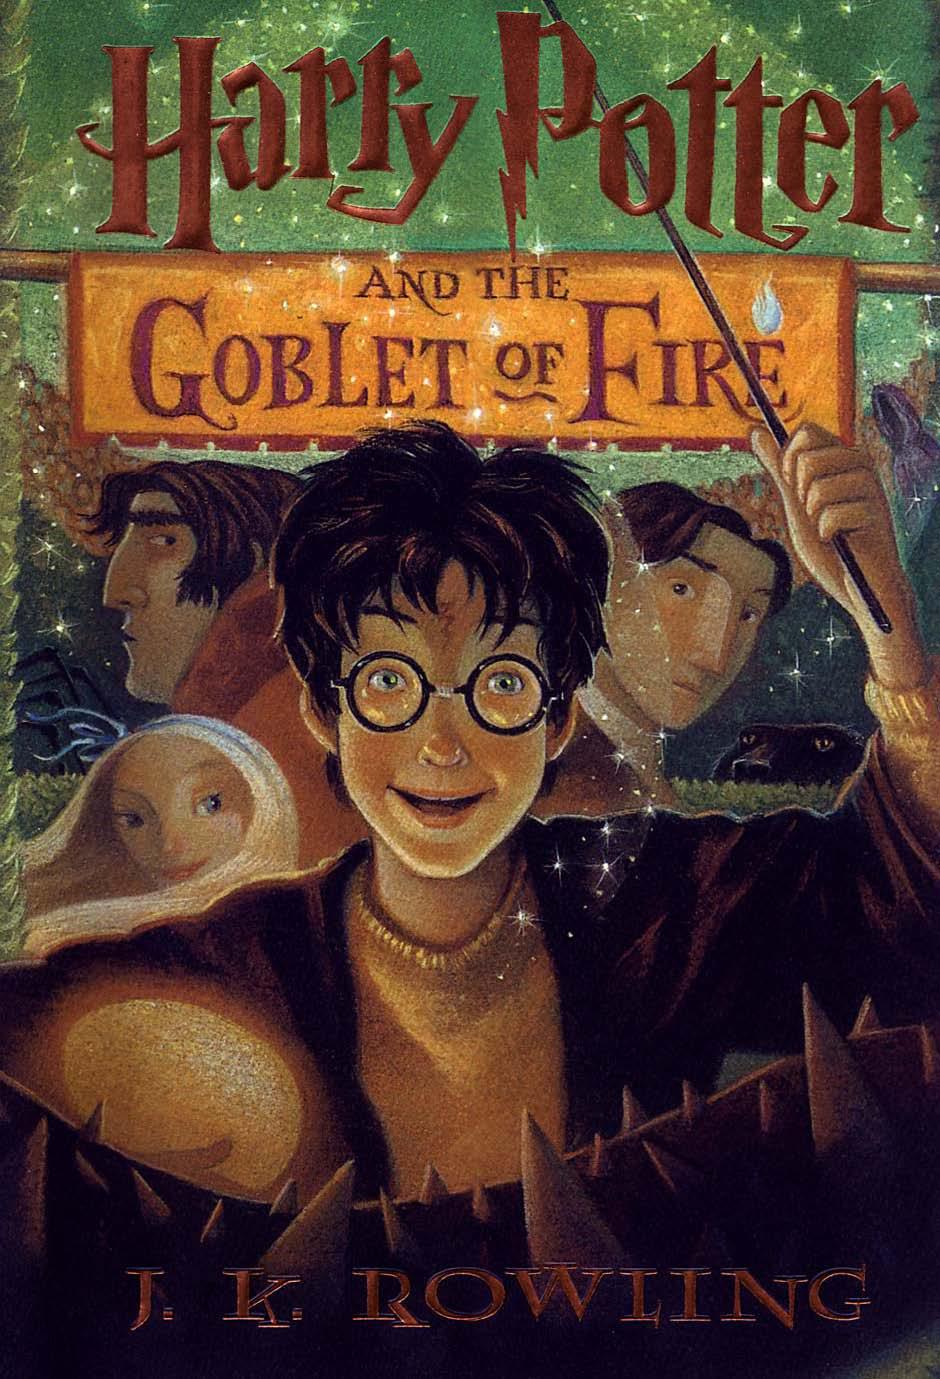 Harry Potter and the Goblet of Fire (J.K. Rowling, 2000)